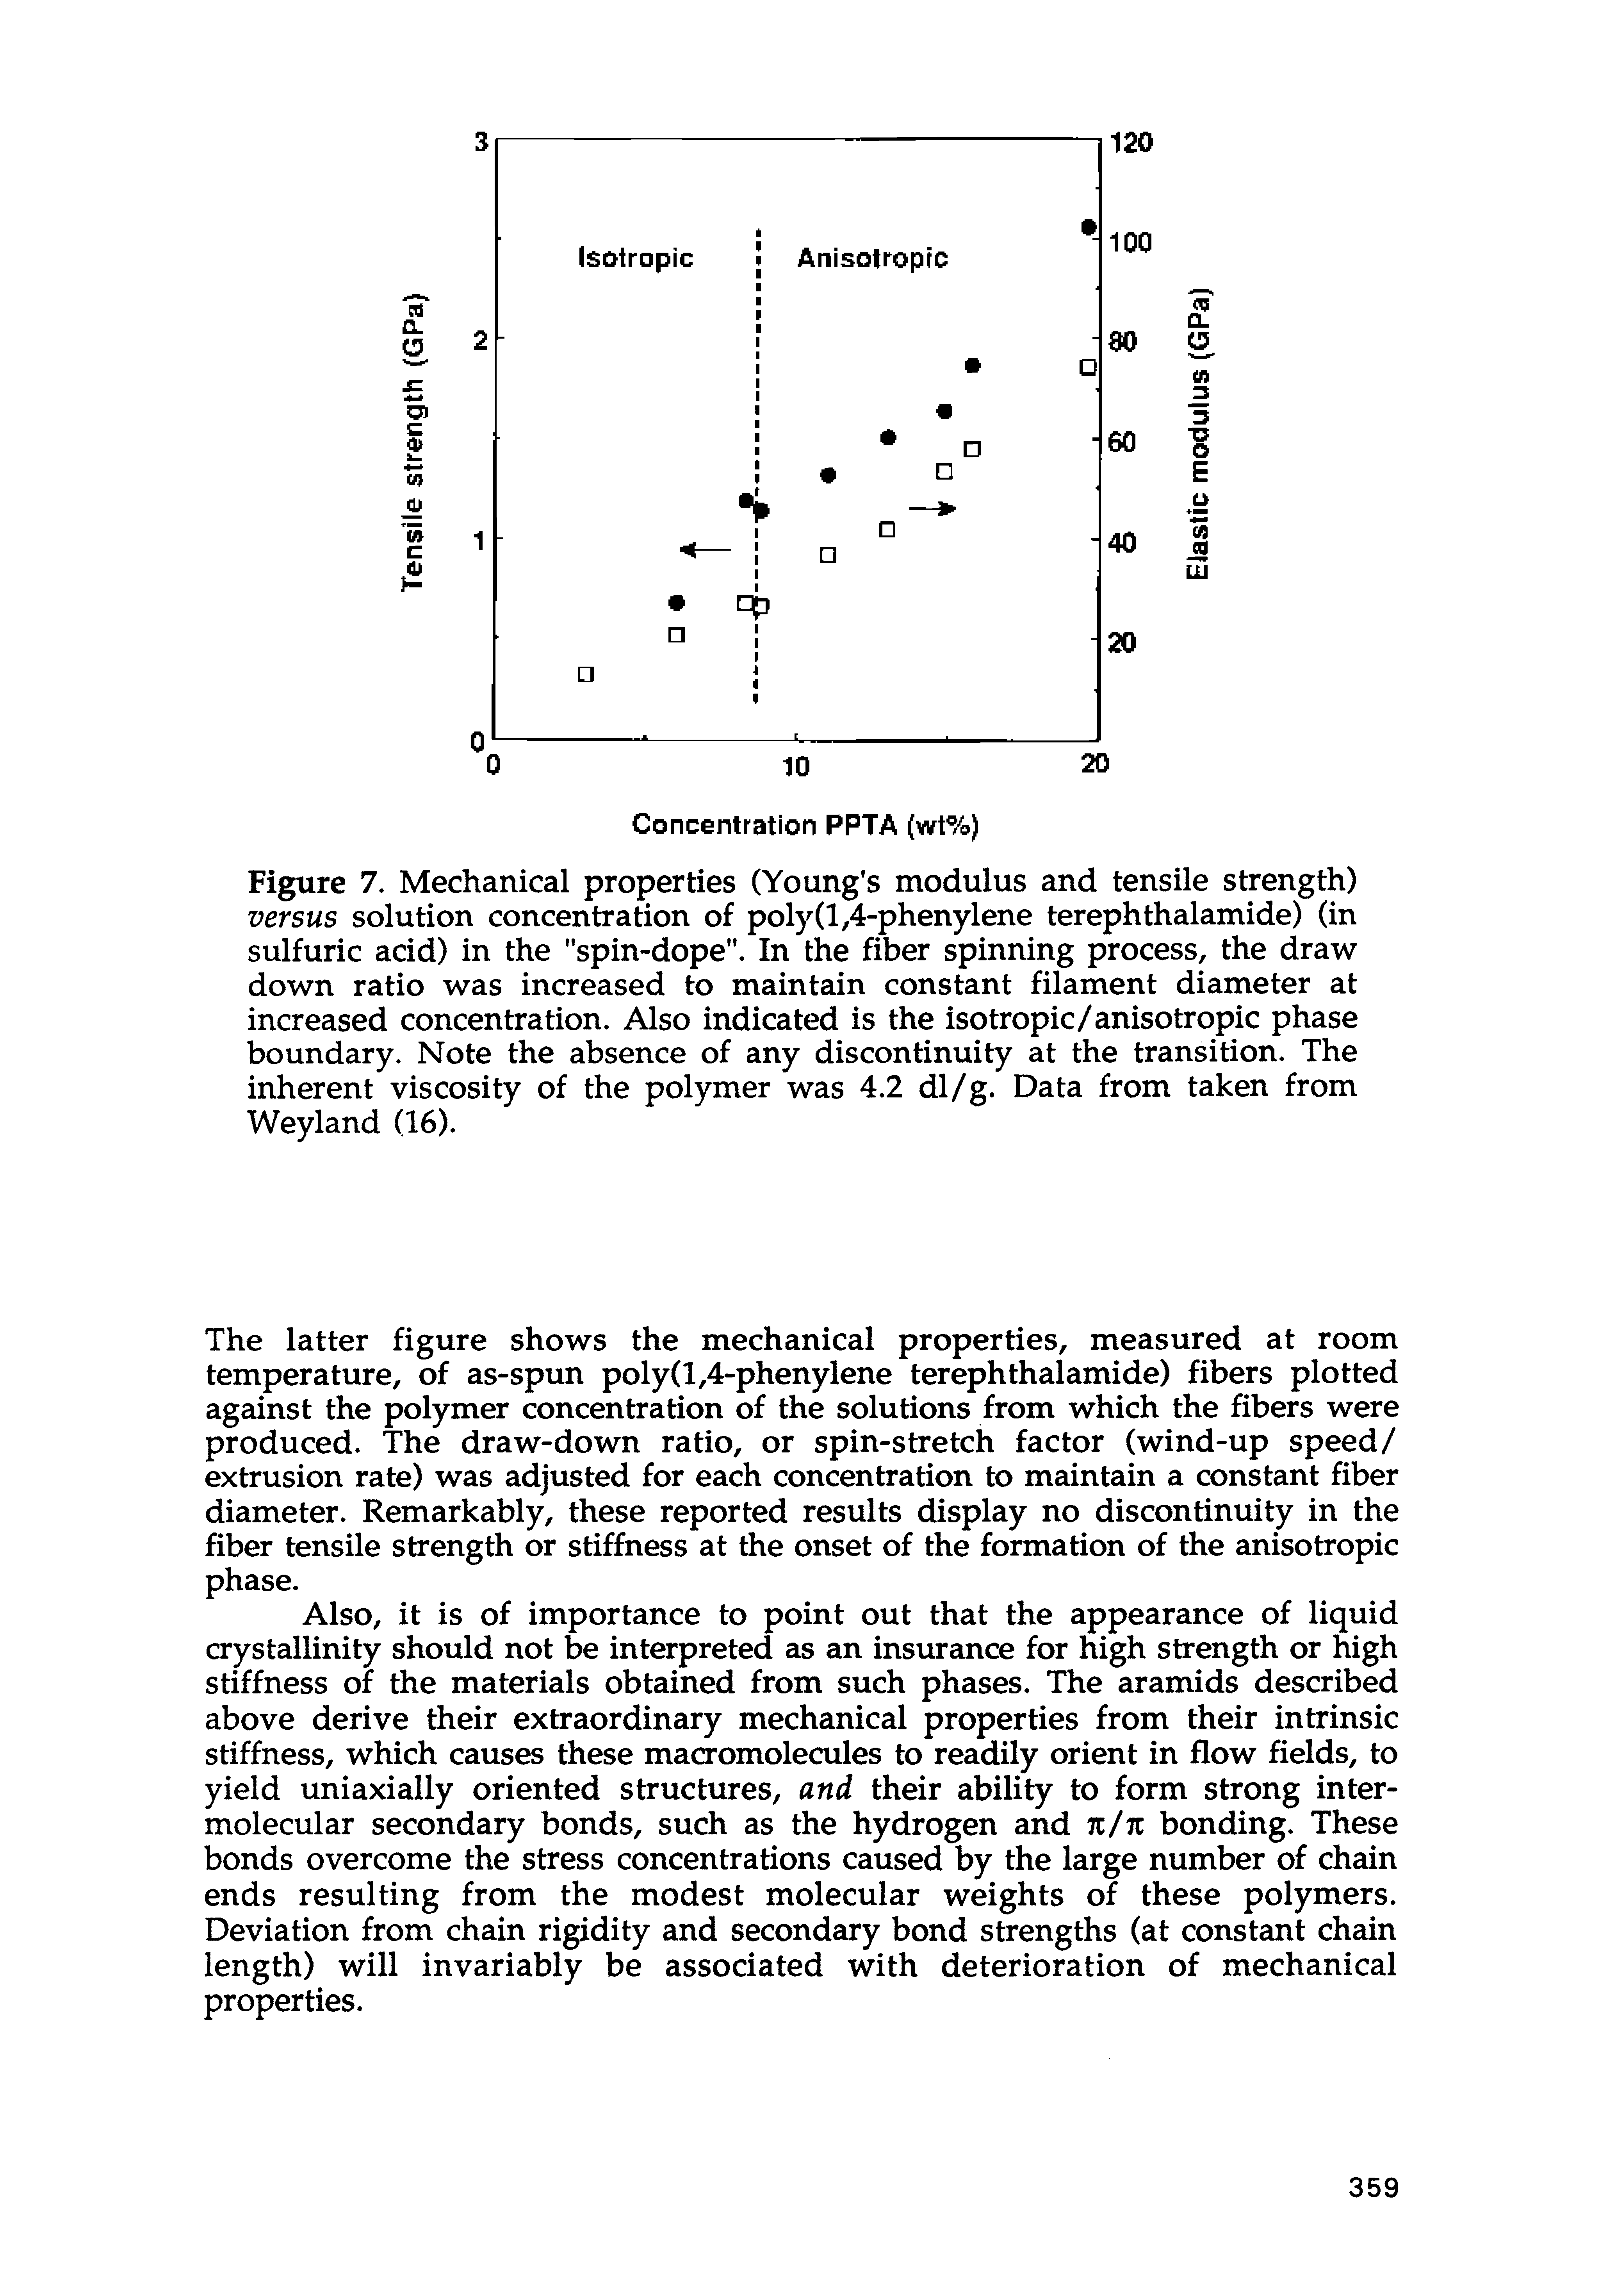 Figure 7. Mechanical properties (Young s modulus and tensile strength) versus solution concentration of poly(l,4-phenylene terephthalamide) (in sulfuric acid) in the "spin-dope". In the fiber spinning process, the draw down ratio was increased to maintain constant filament diameter at increased concentration. Also indicated is the isotropic/anisotropic phase boundary. Note the absence of any discontinuity at the transition. The inherent viscosity of the polymer was 4.2 dl/g. Data from taken from Weyland (16).